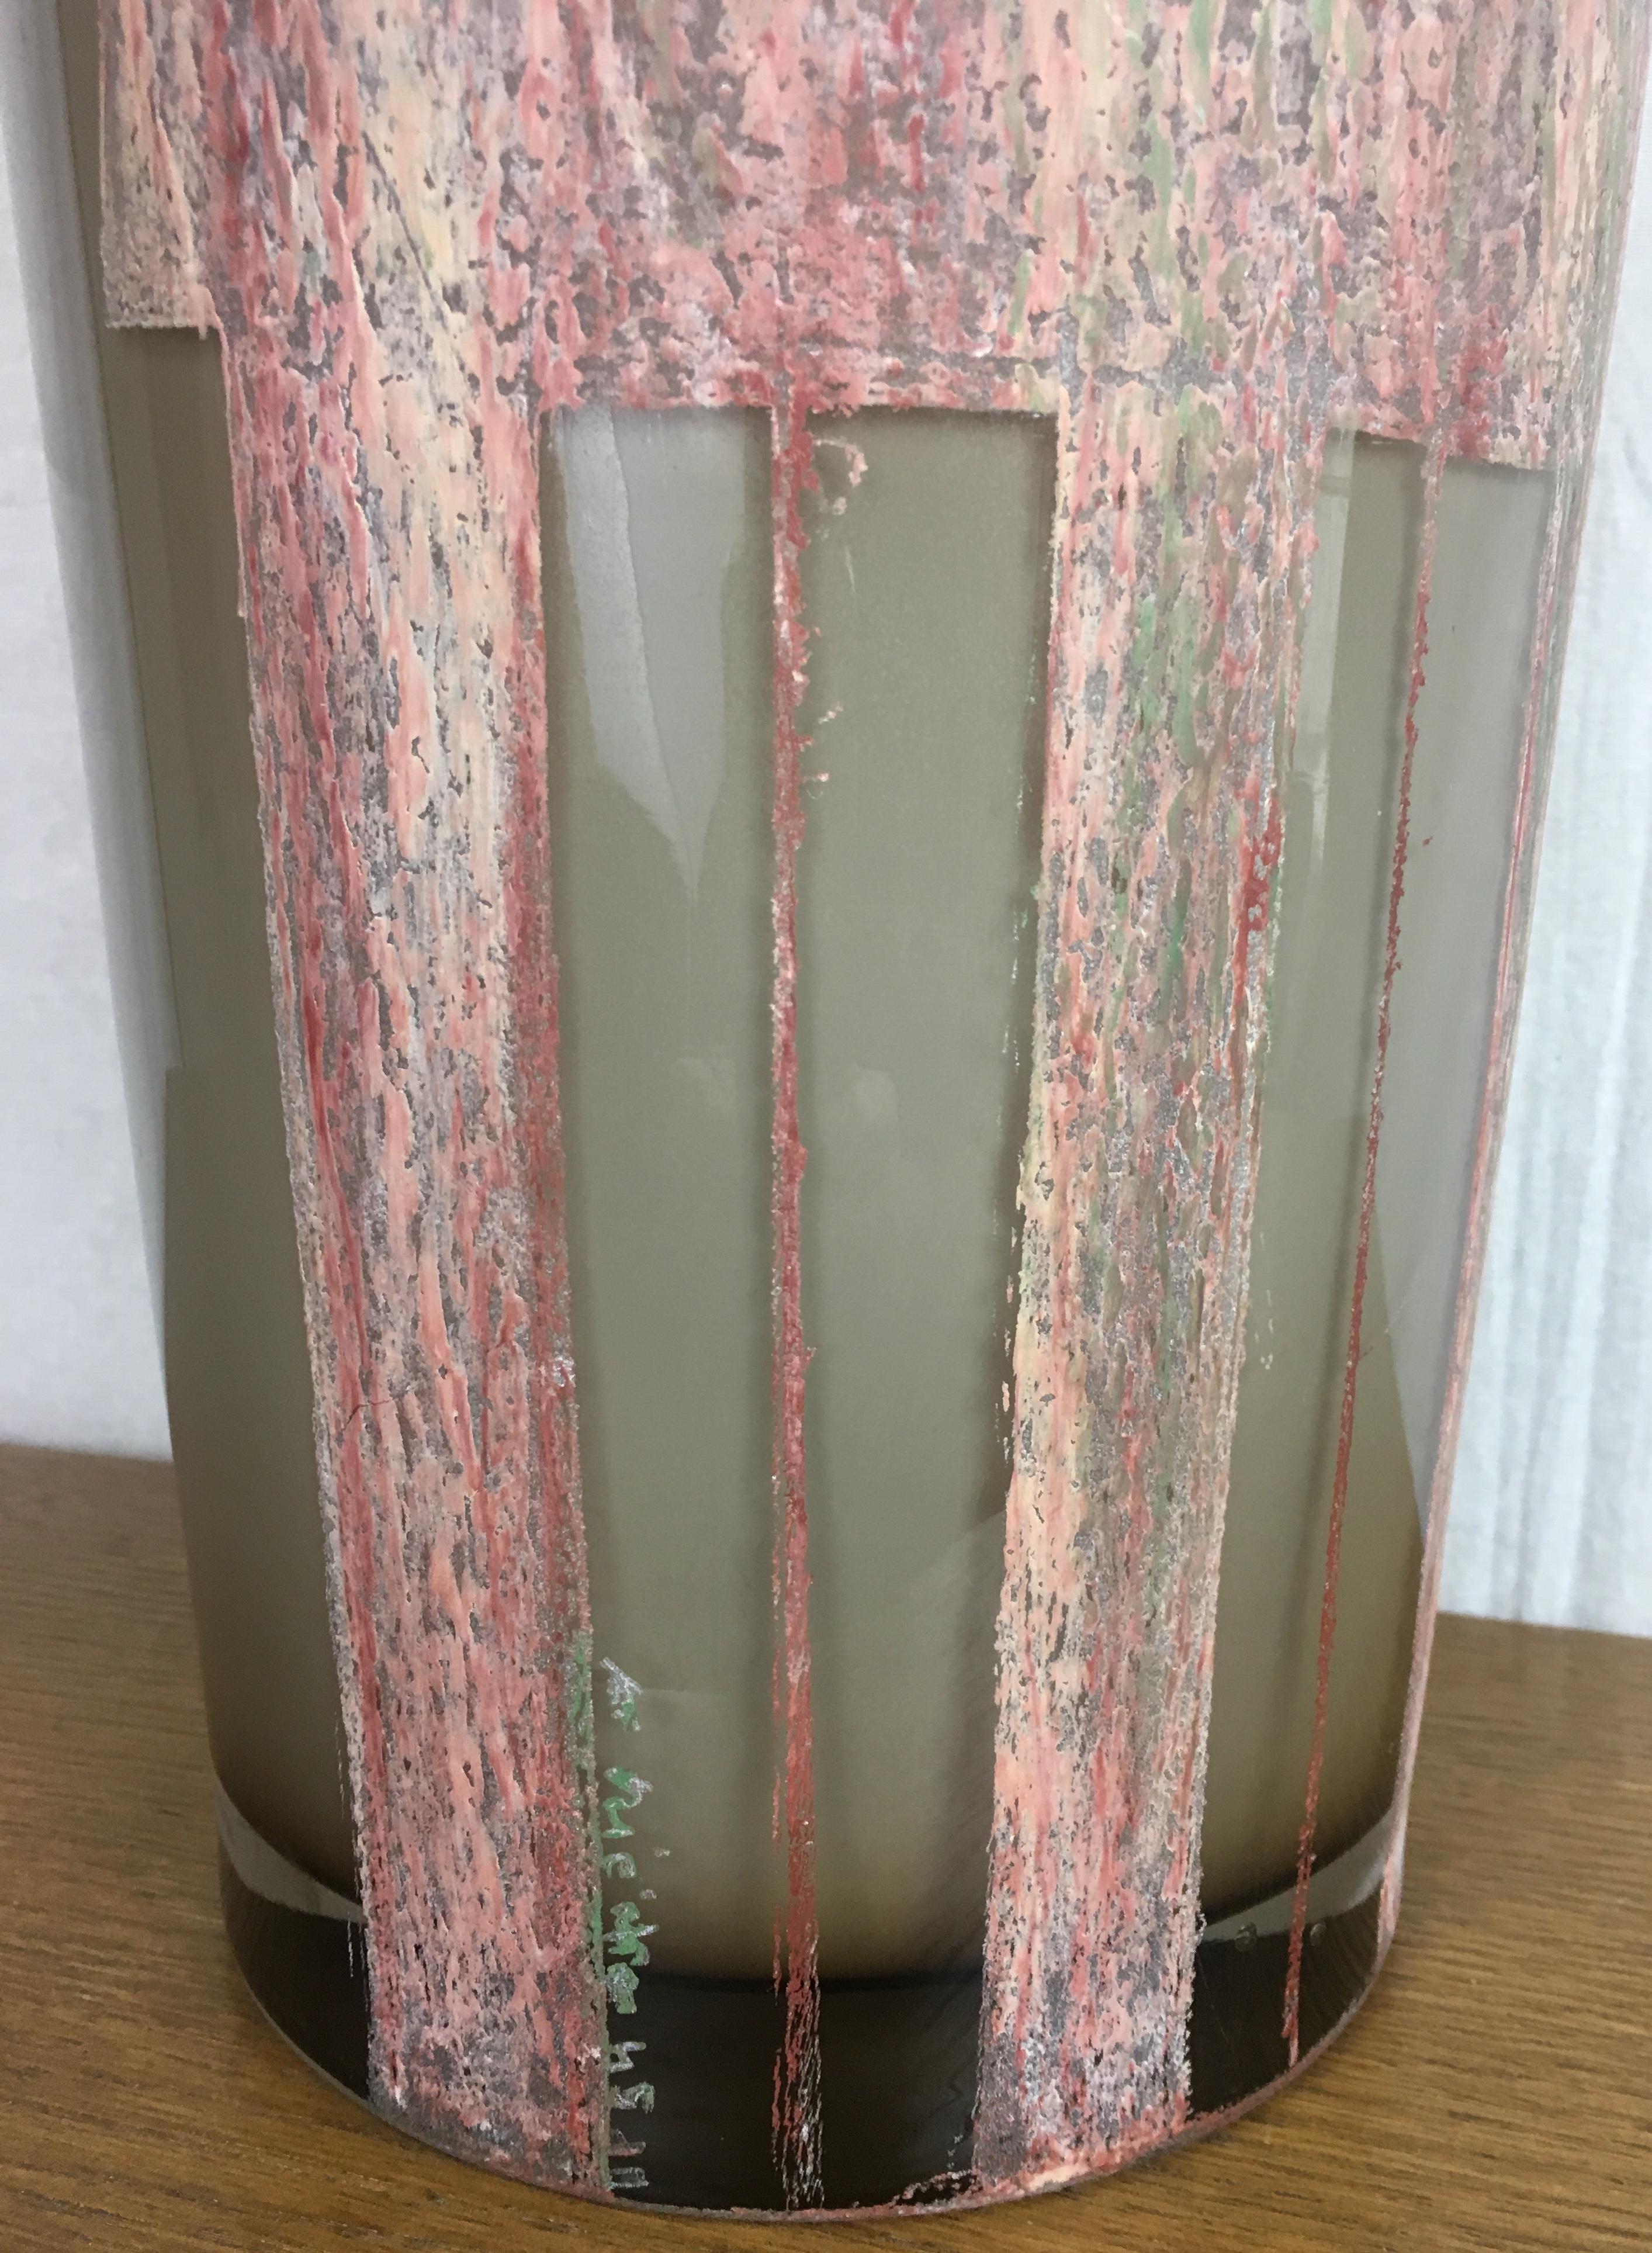 20th Century Art Deco Cubist Glass Floor Vase by Anatole Riecke, from La Coupole Brasserie For Sale